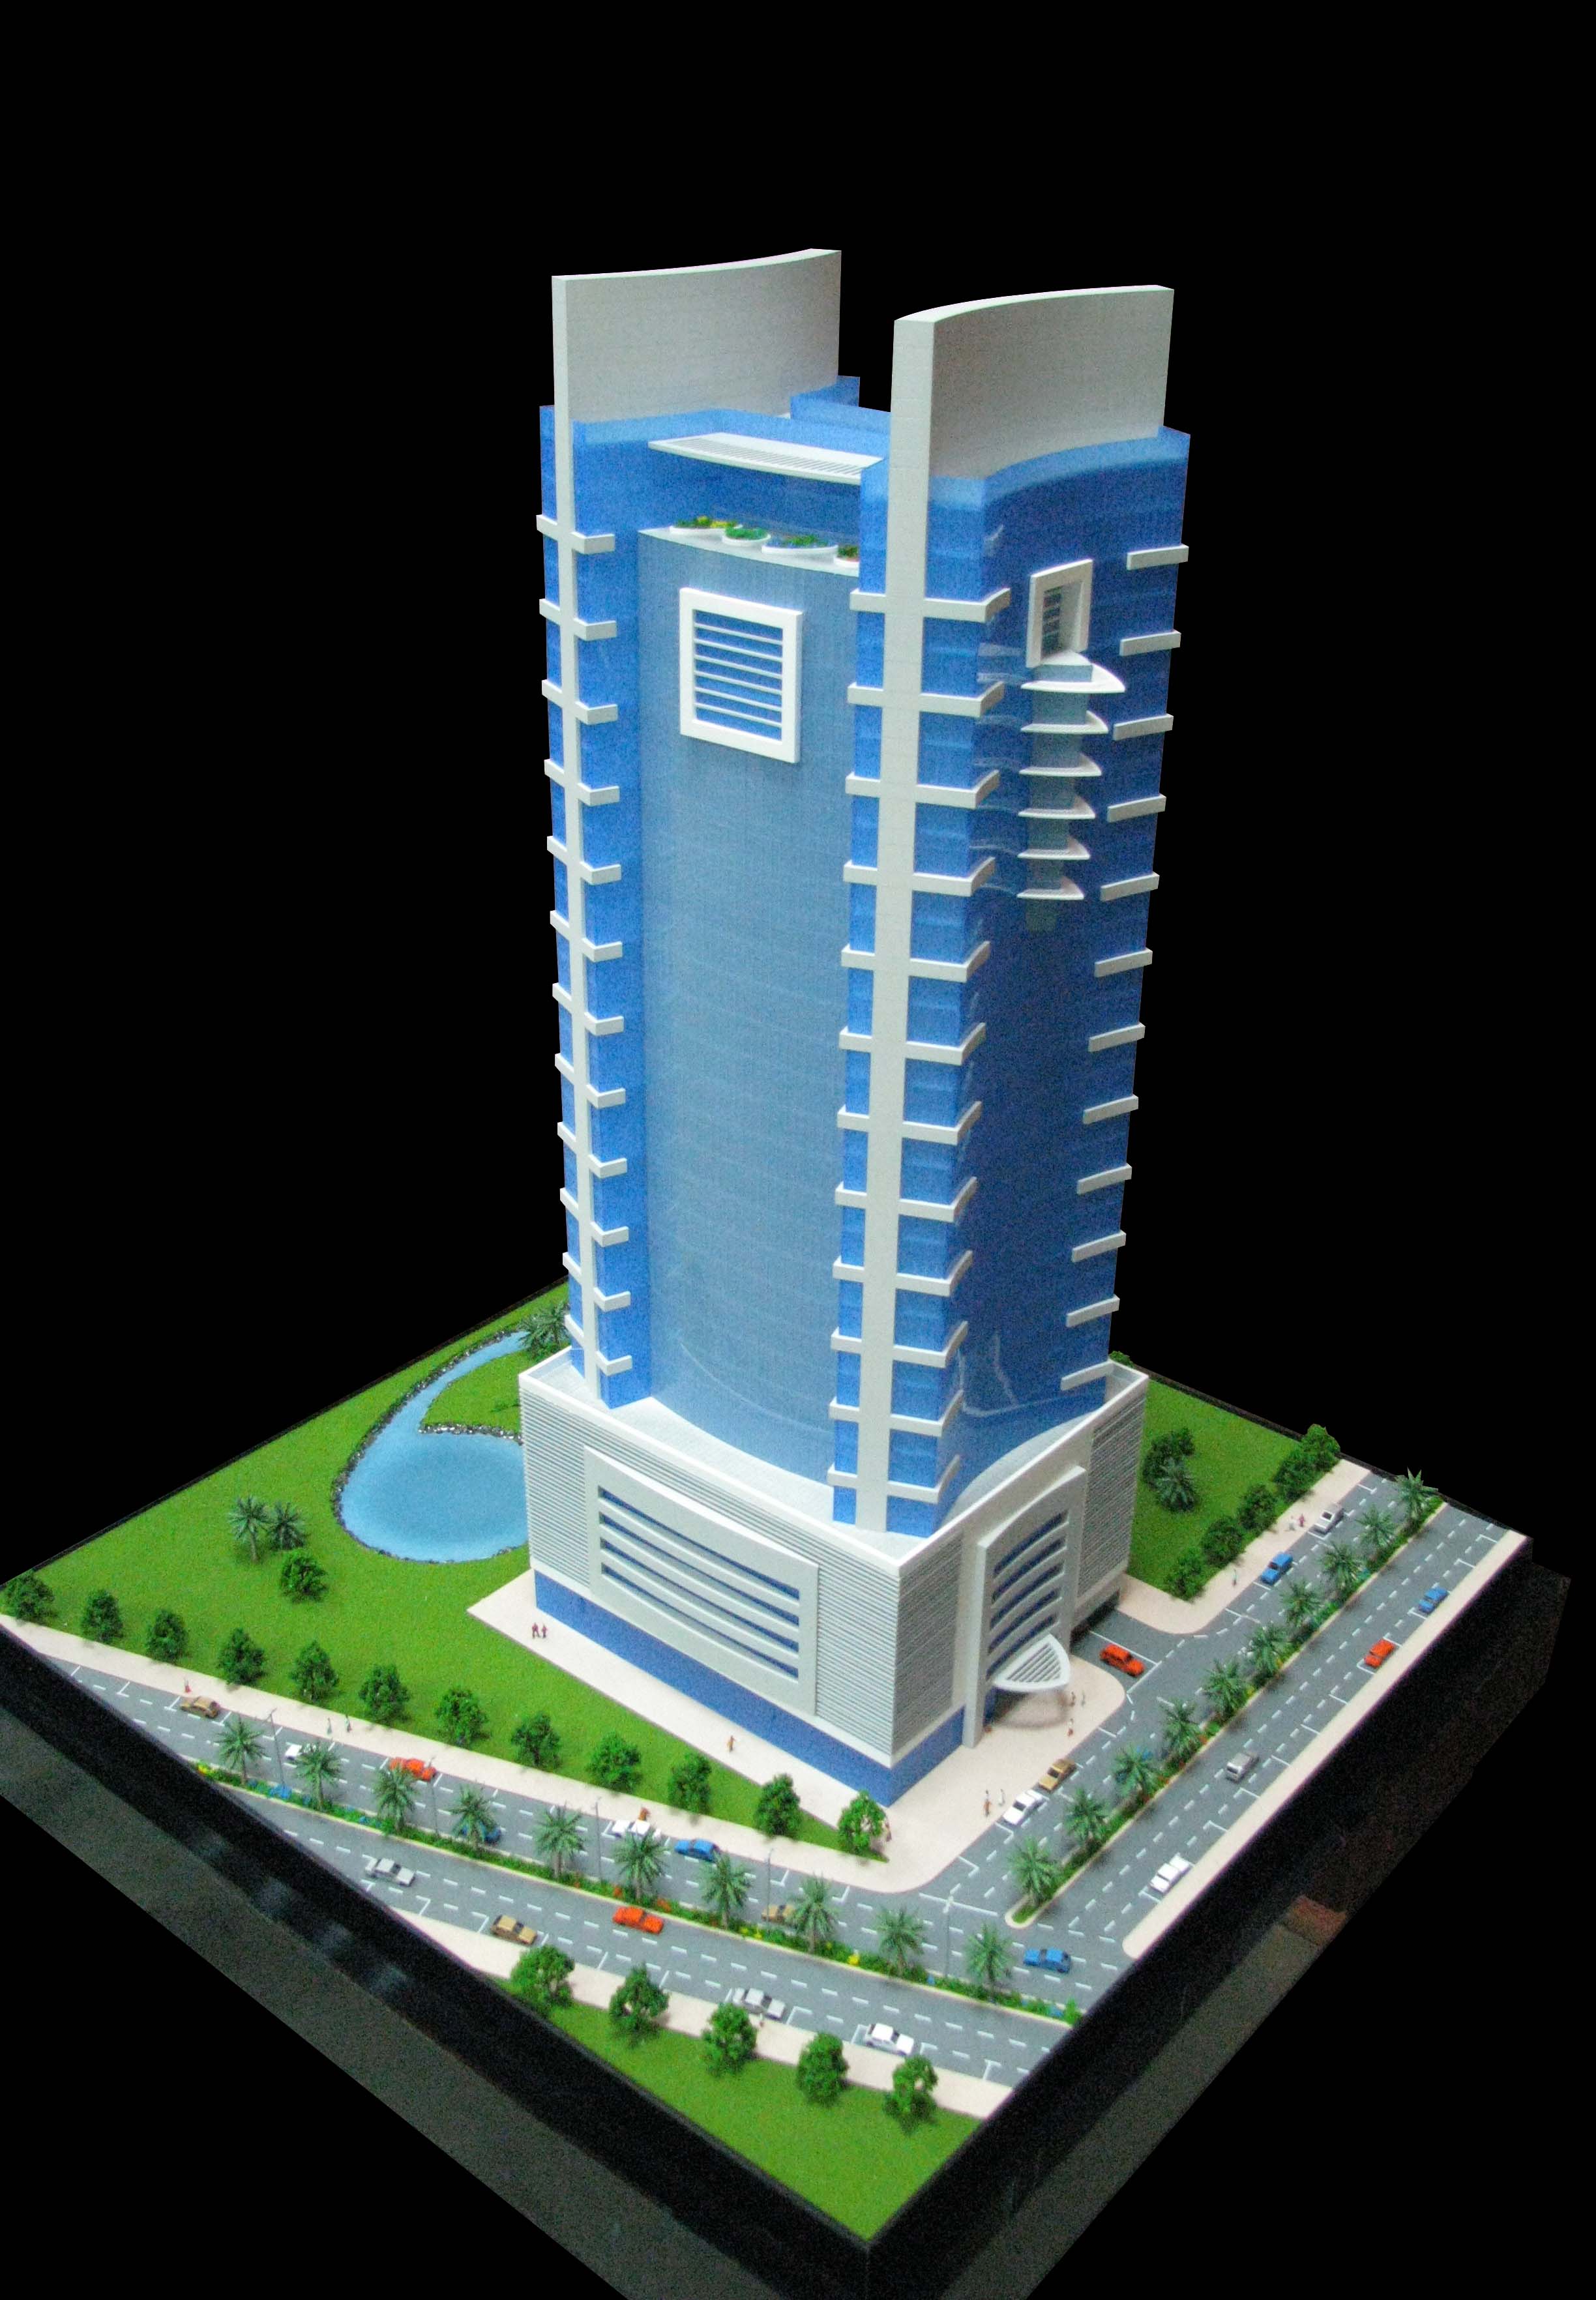 Scale Model - Architectural - Towers - Key Biz Tower - UAE